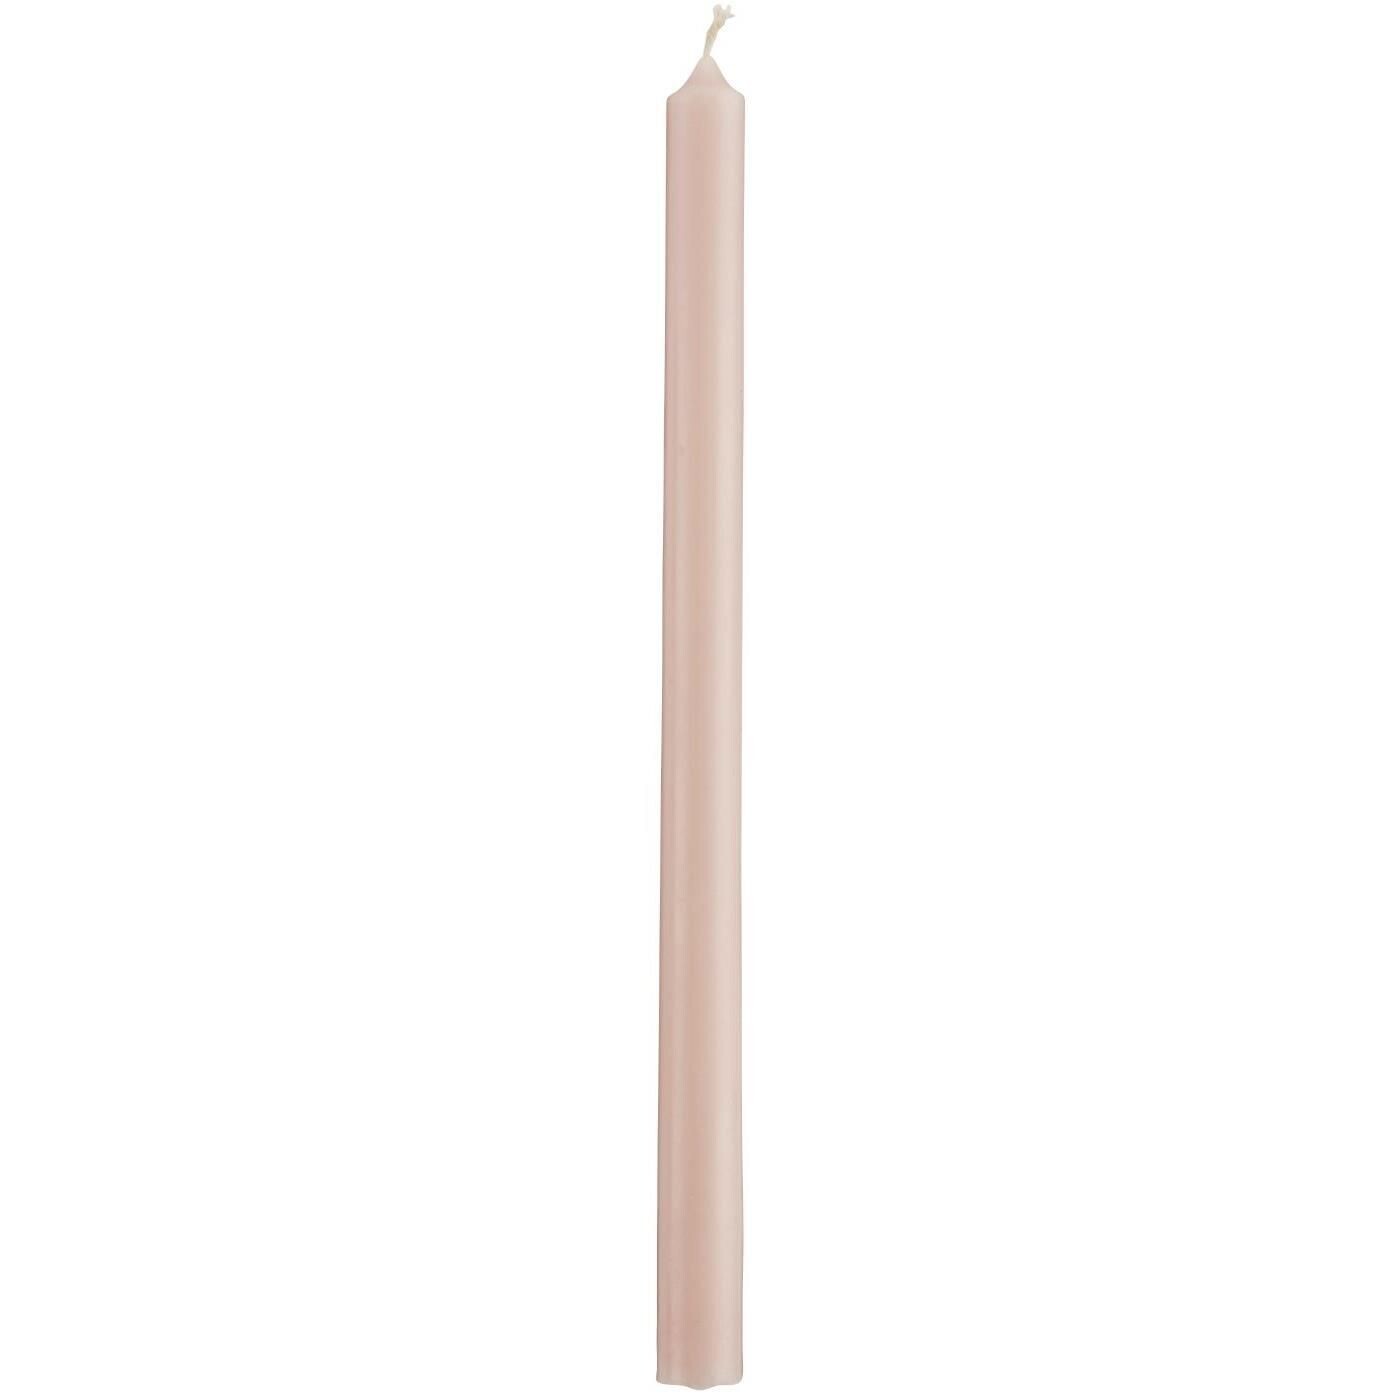 4 TALL TAPER CANDLES - DUSTY PINK